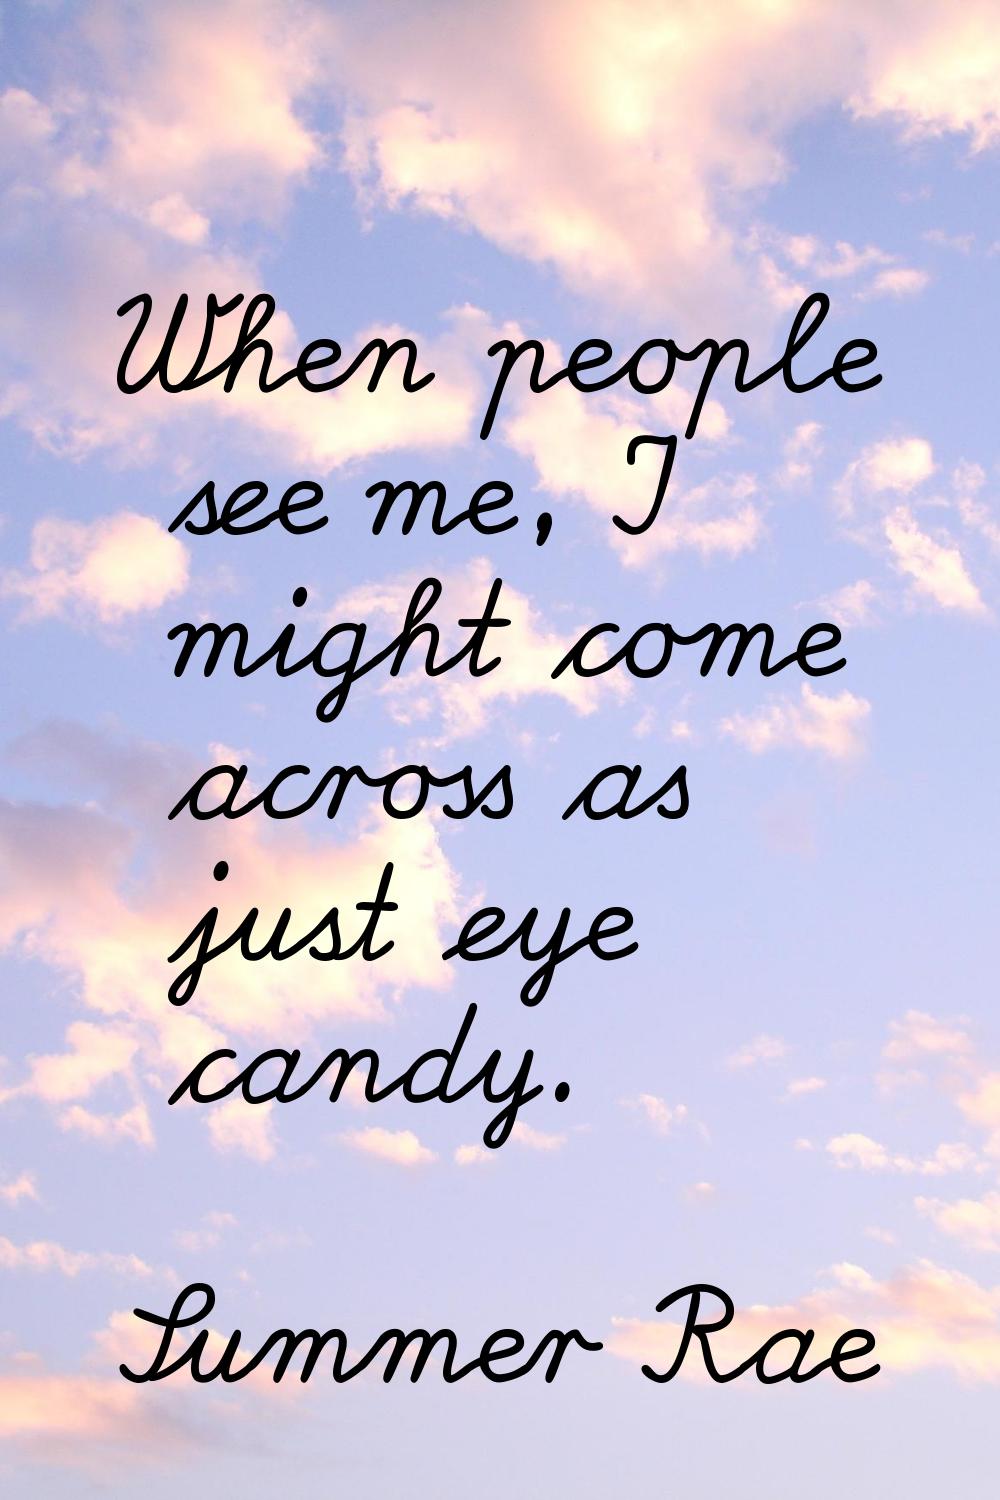 When people see me, I might come across as just eye candy.